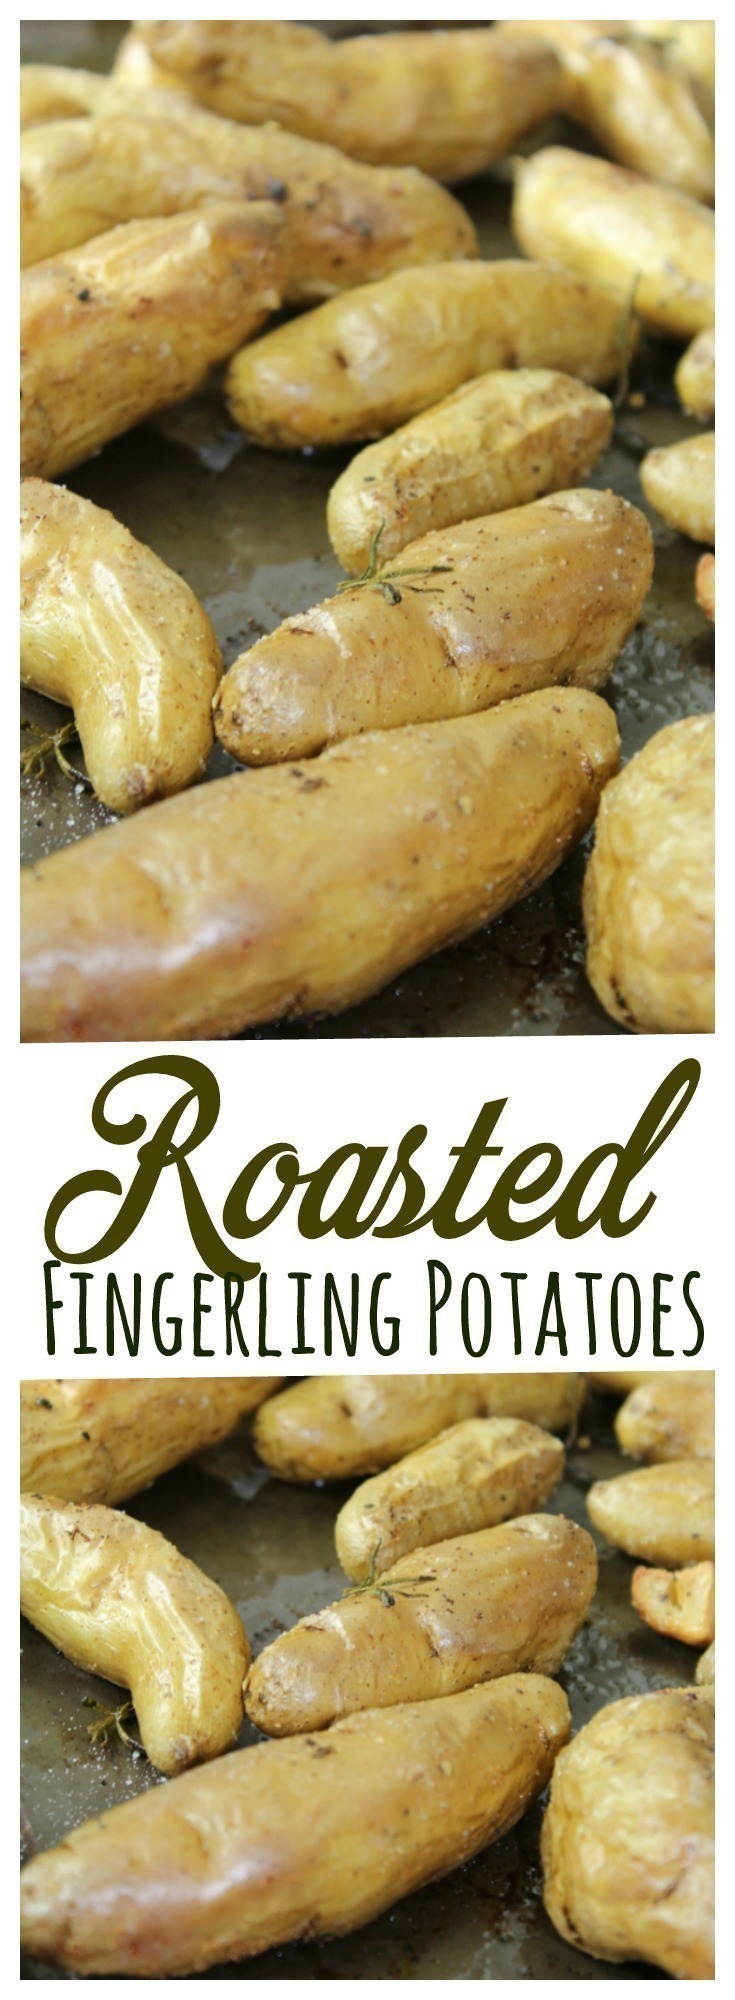 These Fingerling Potatoes are tossed with garlic and herbs and roasted in the oven to make an incredibly thick, flavorful potato that's excellent as a side dish!